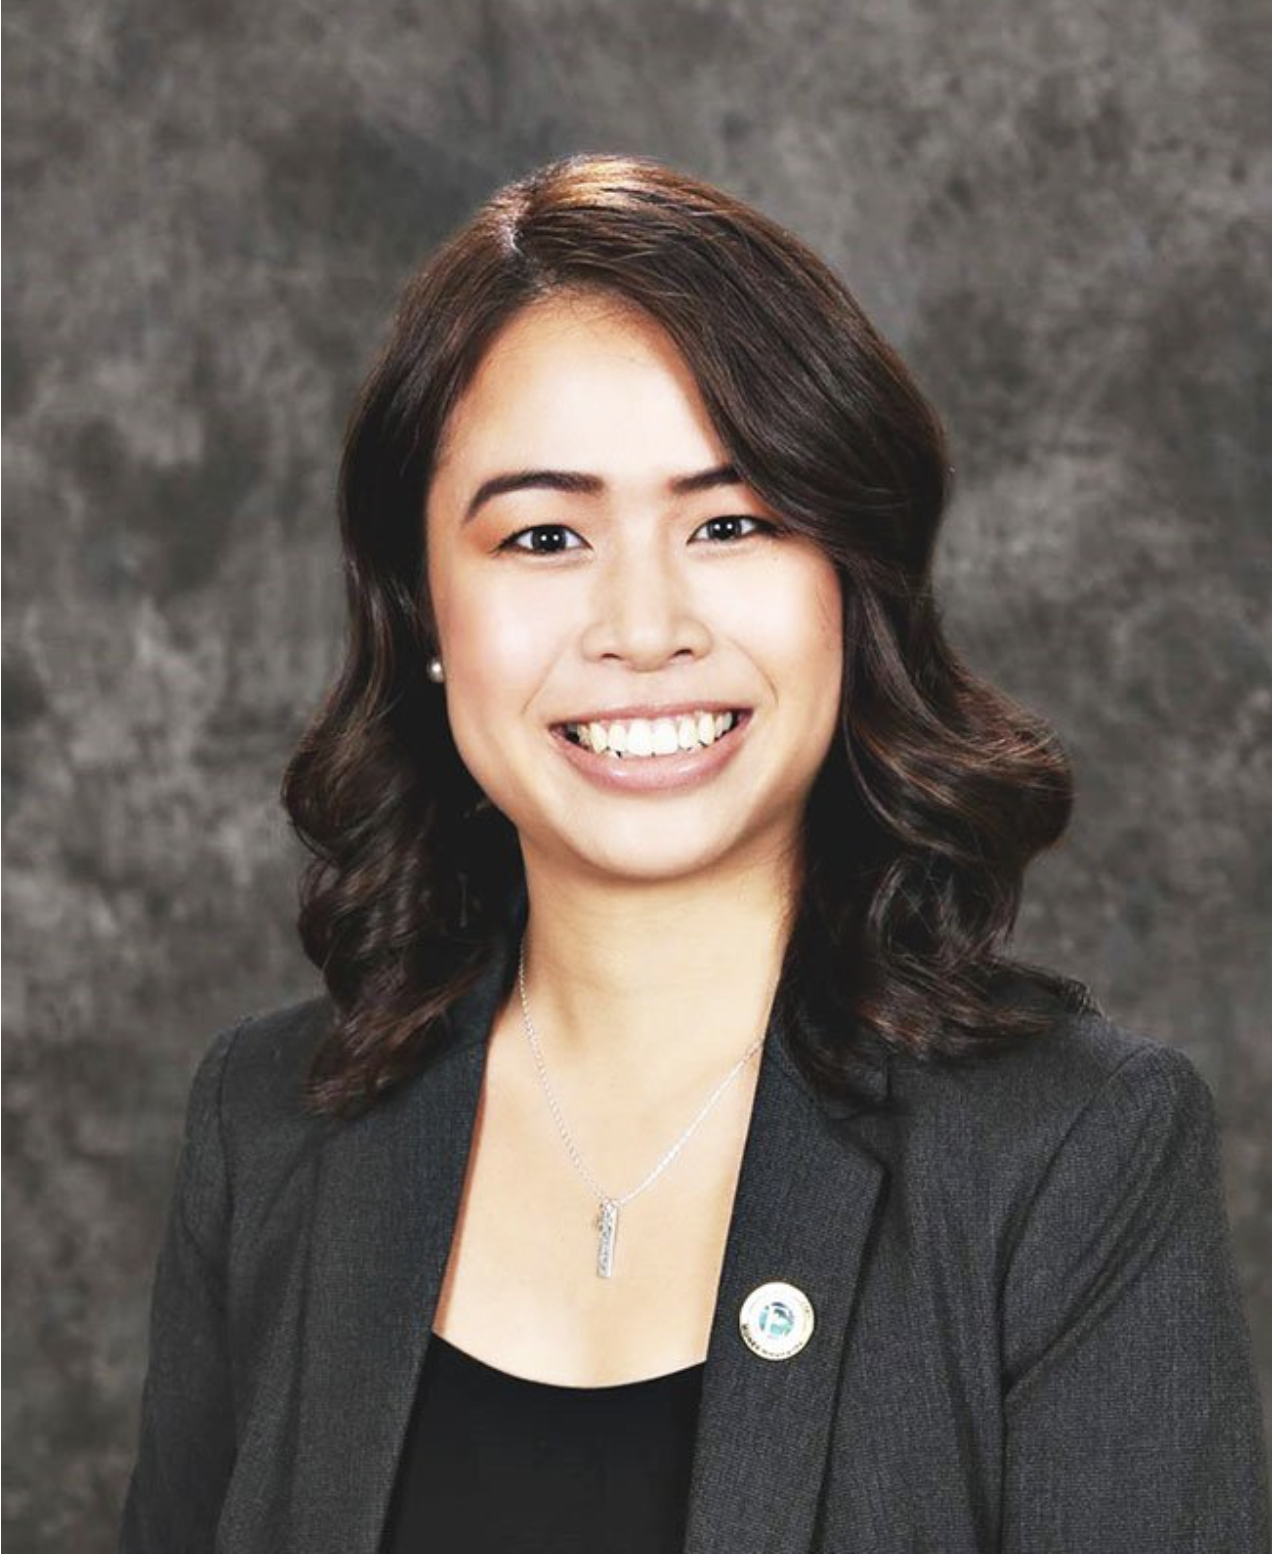 Meet jocelyn yow - the kedahan who is now the youngest mayor of a city in california!